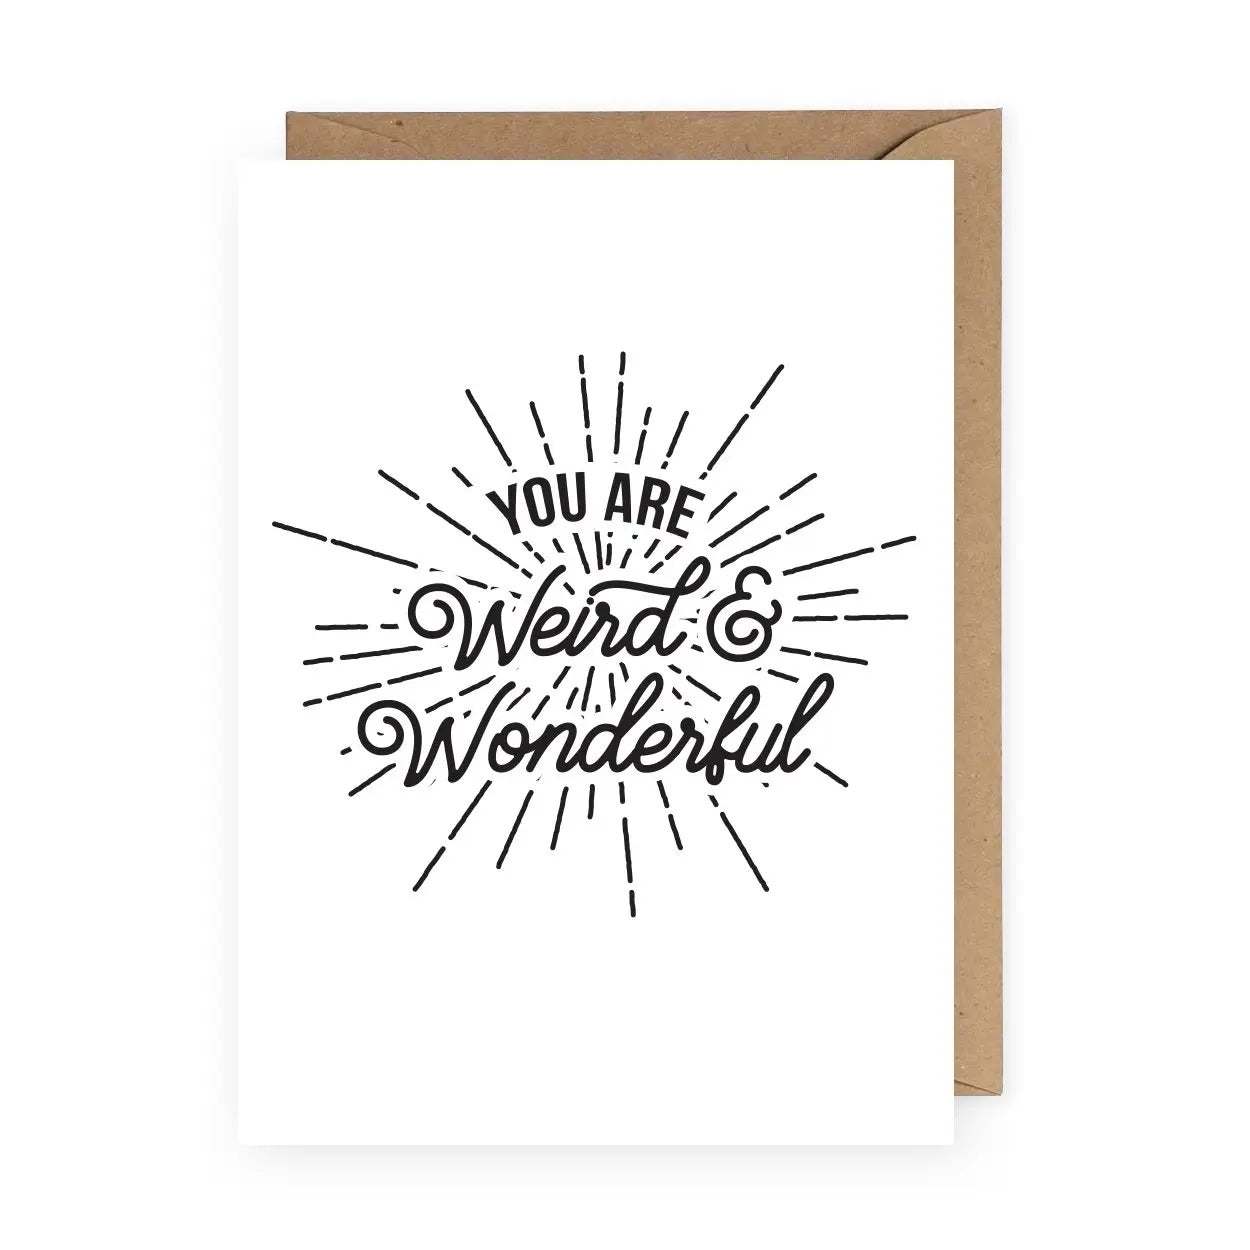 "You Are Weird and Wonderful" Greeting Card